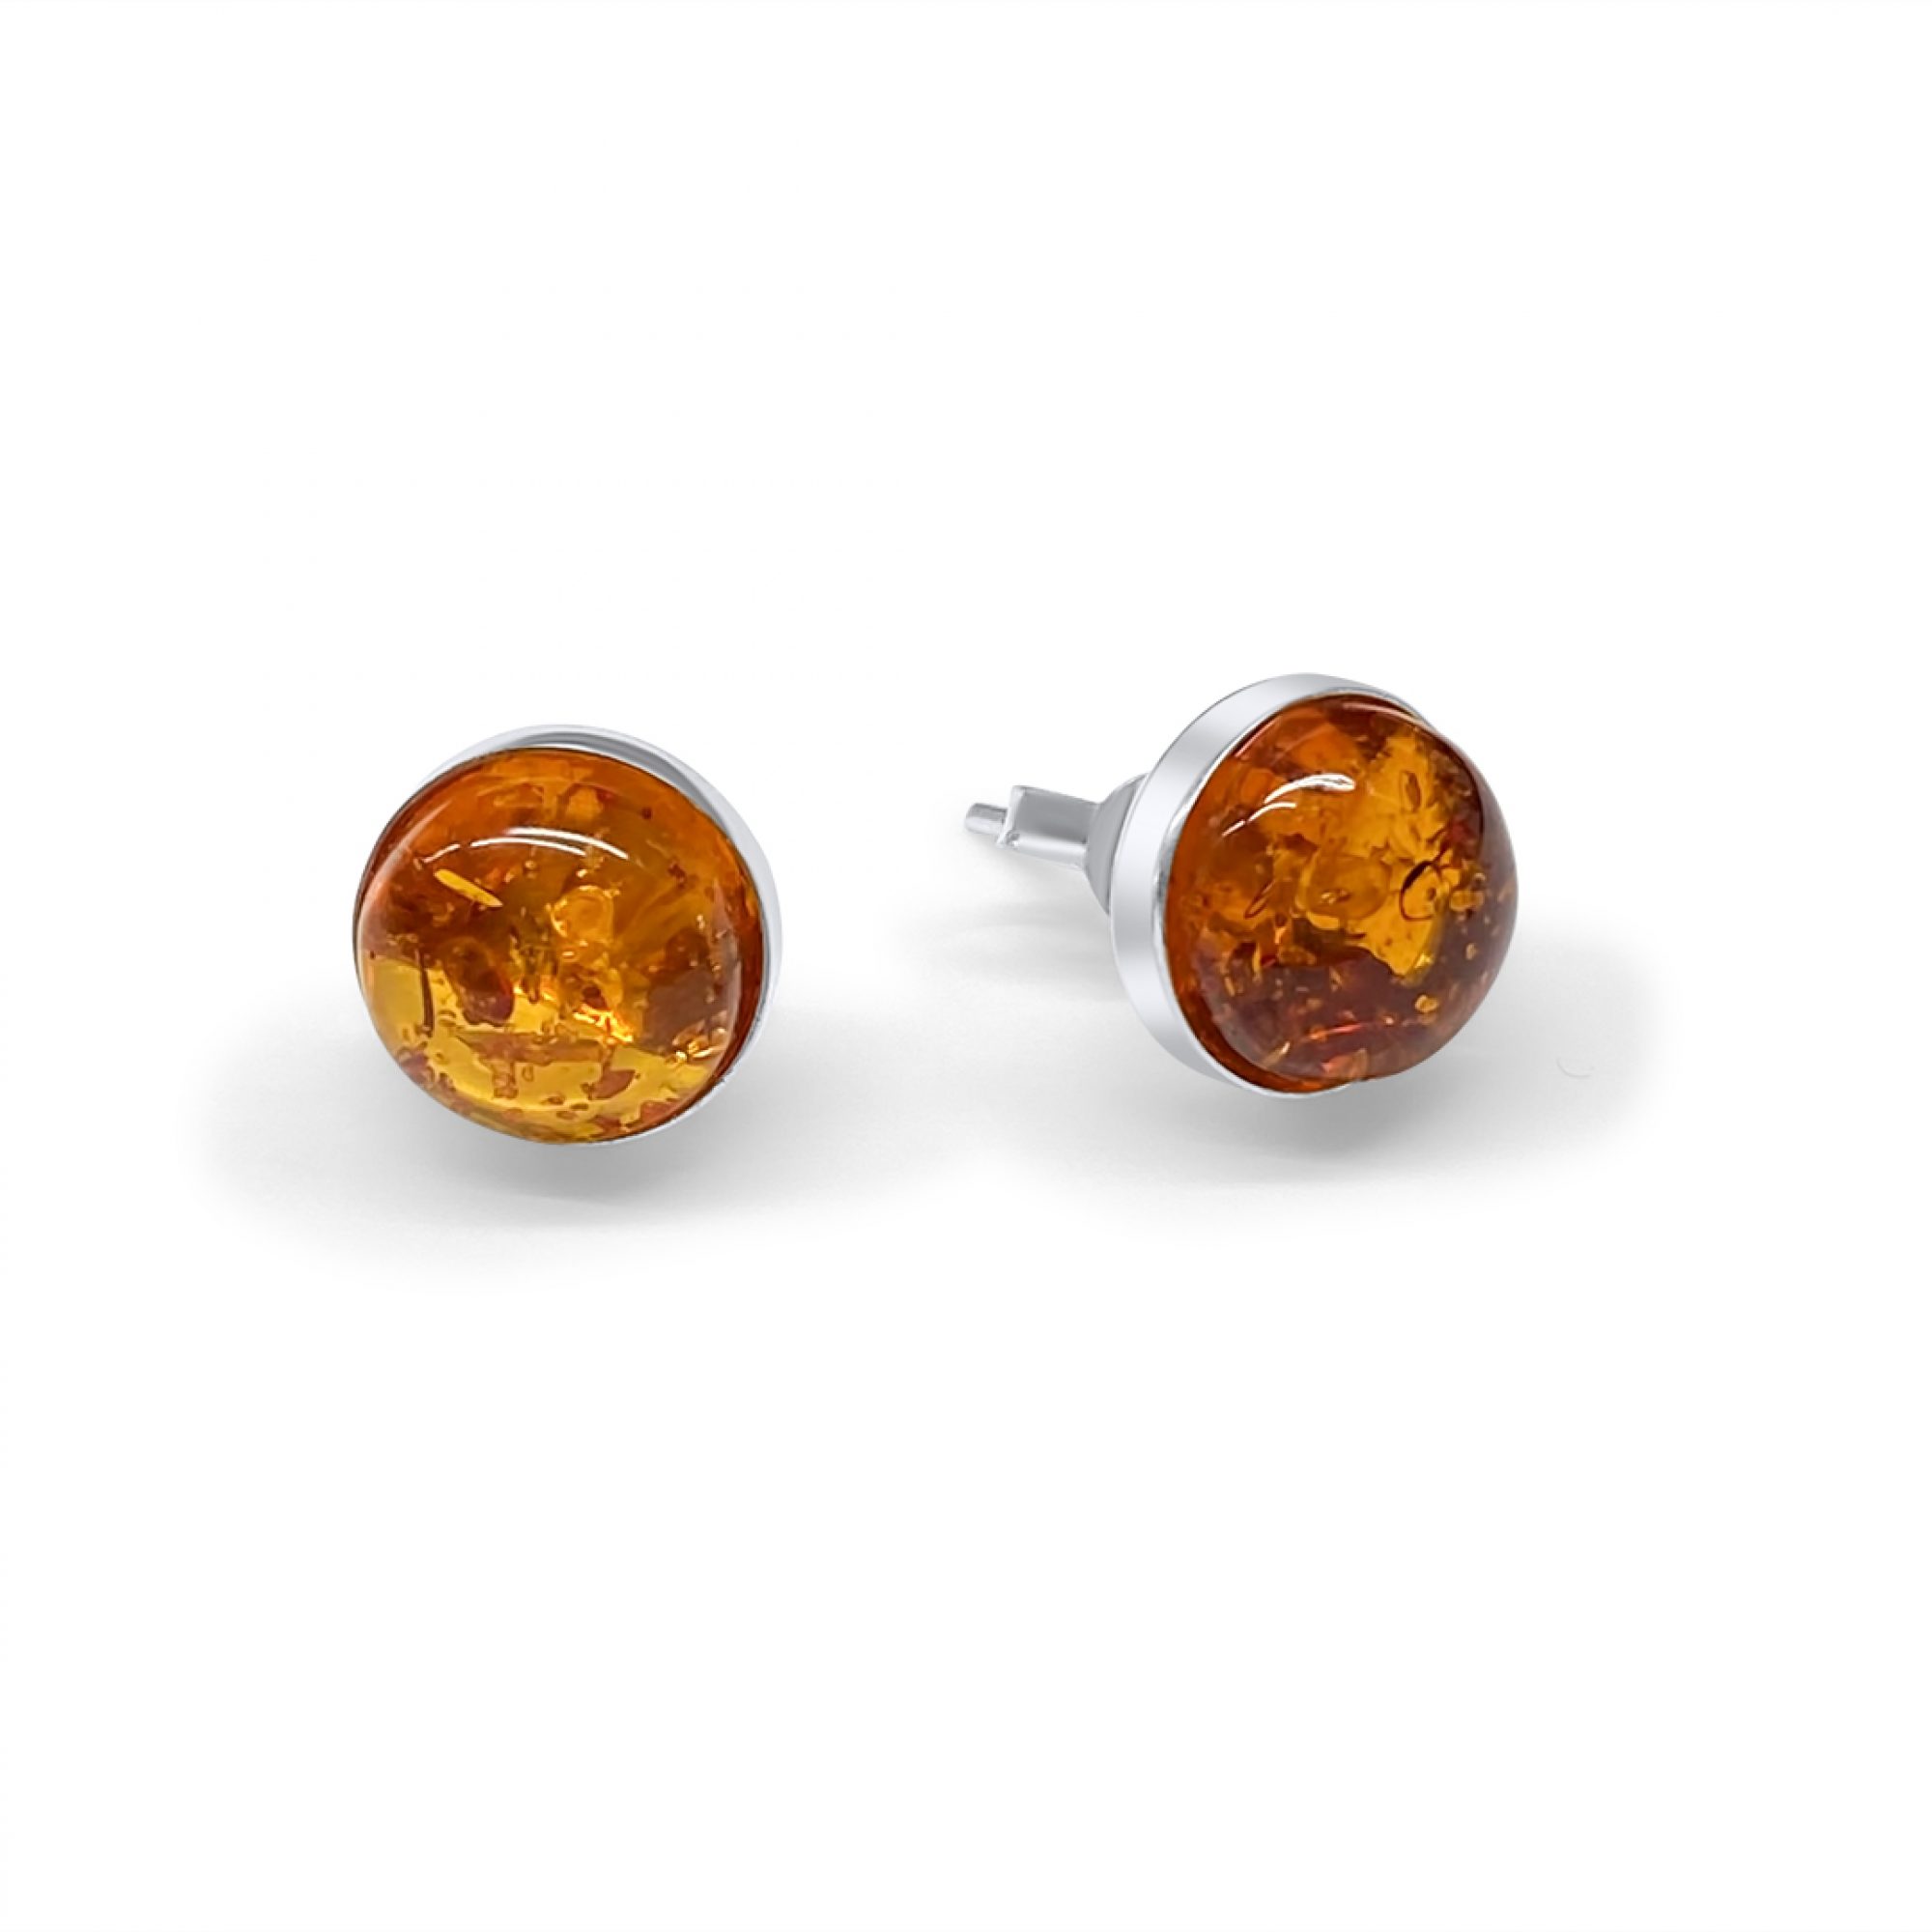 Earrings with amber stones